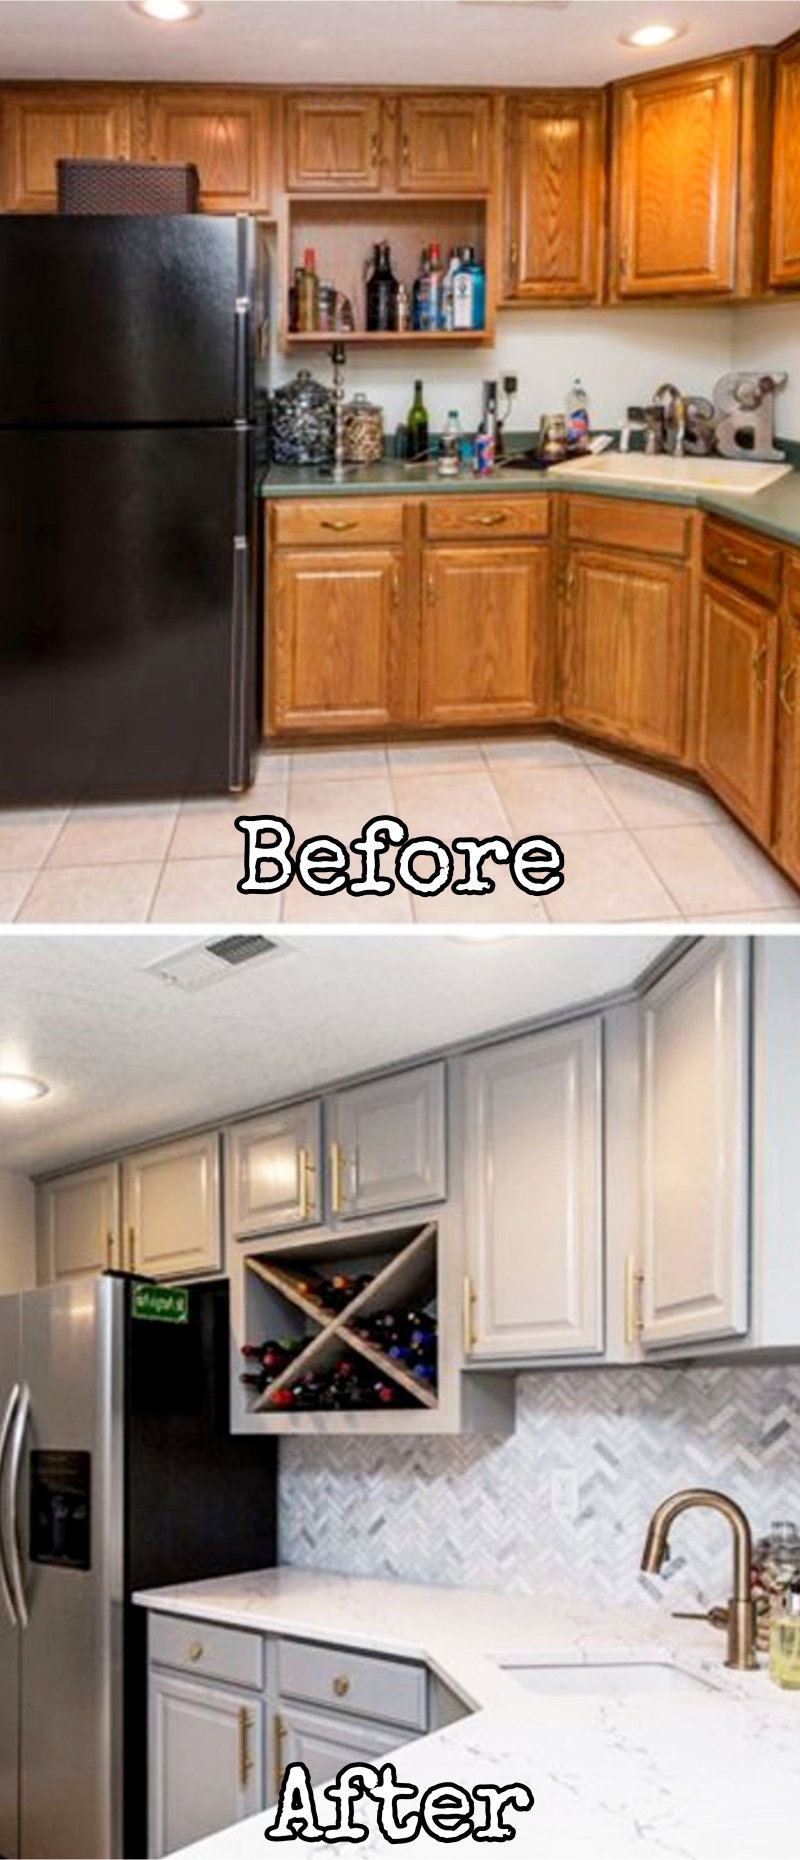 Small kitchen remodel - before and after pictures of small kitchen makeovers #kitchenideas #farmhousedecor #kitchendecor #kitchenremodel #diyhomedecor #homedecorideas #farmhousekitchen